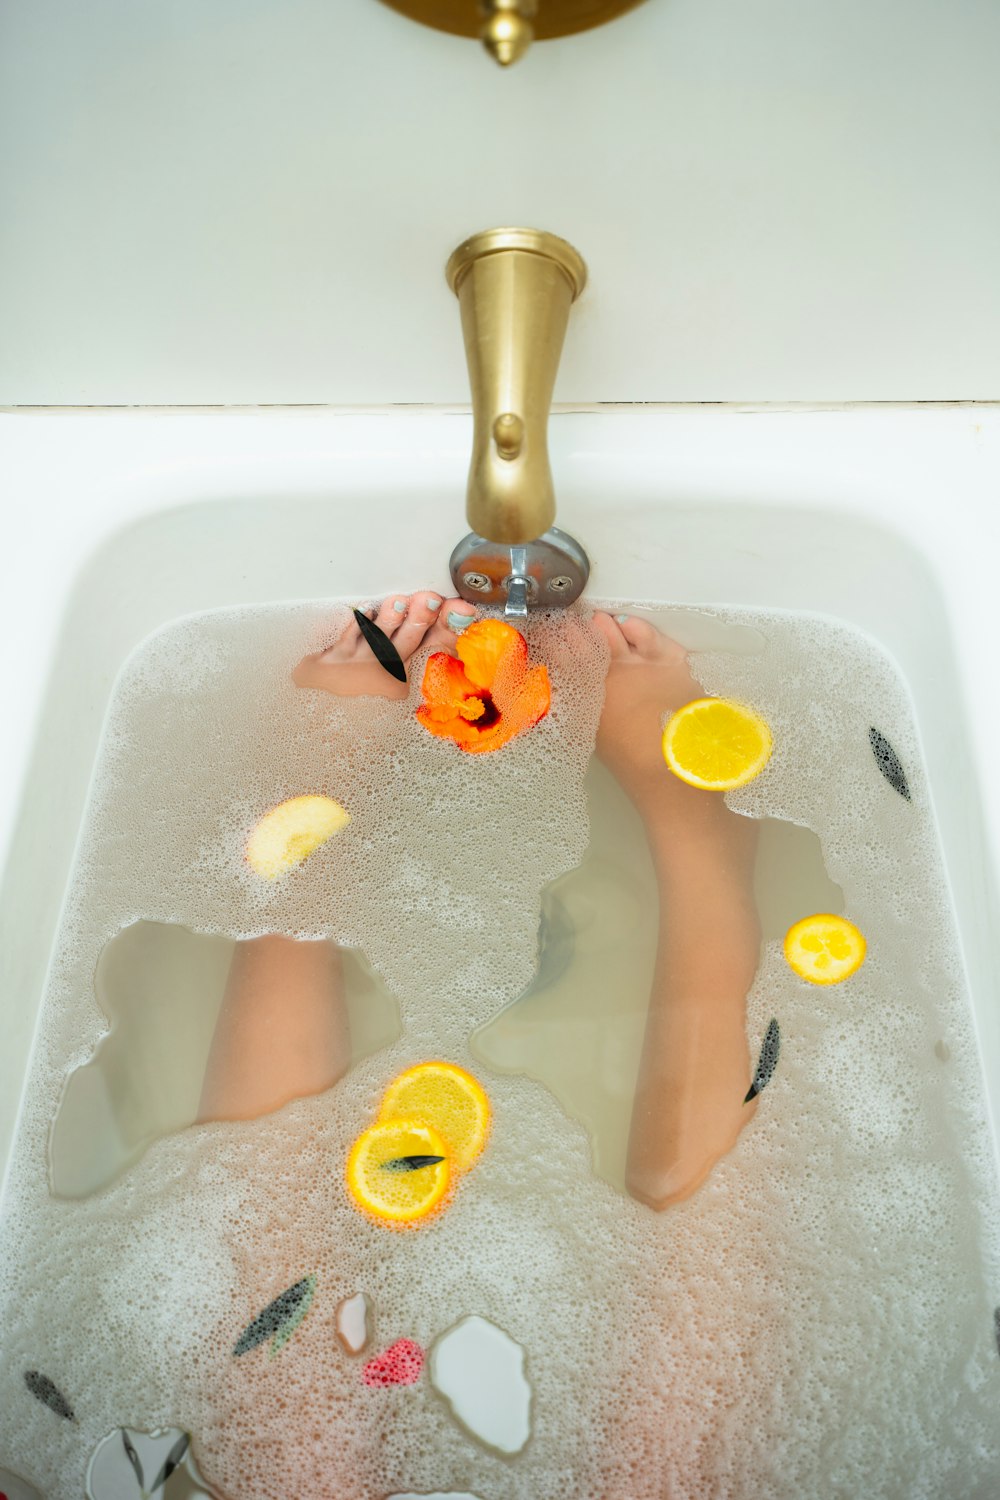 a child in a bathtub with oranges and a faucet